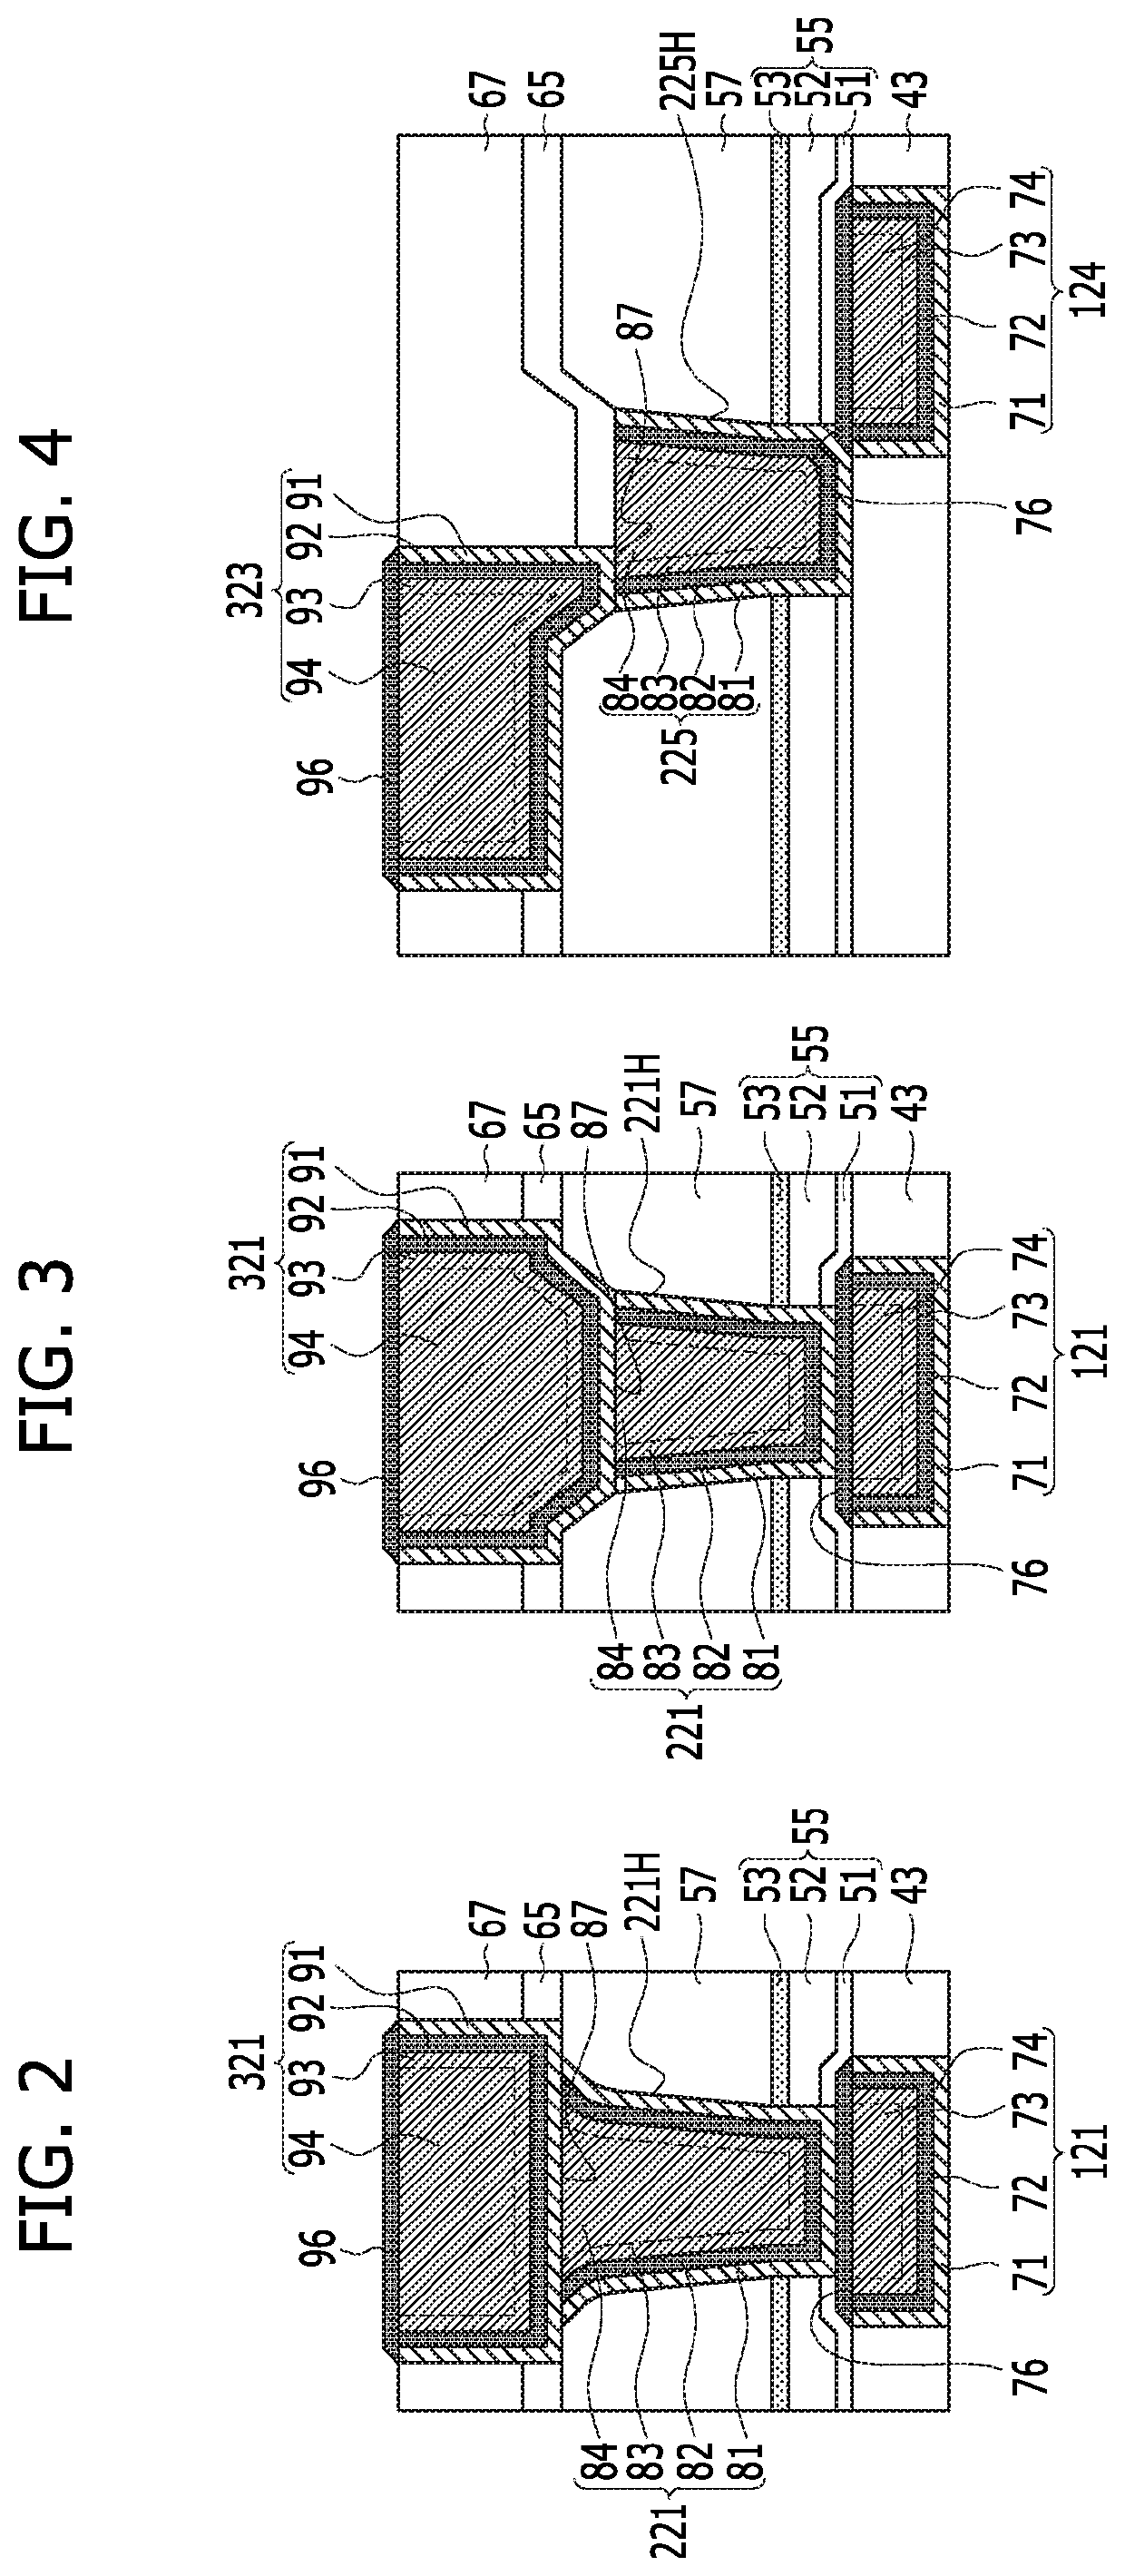 Semiconductor device including dummy contact